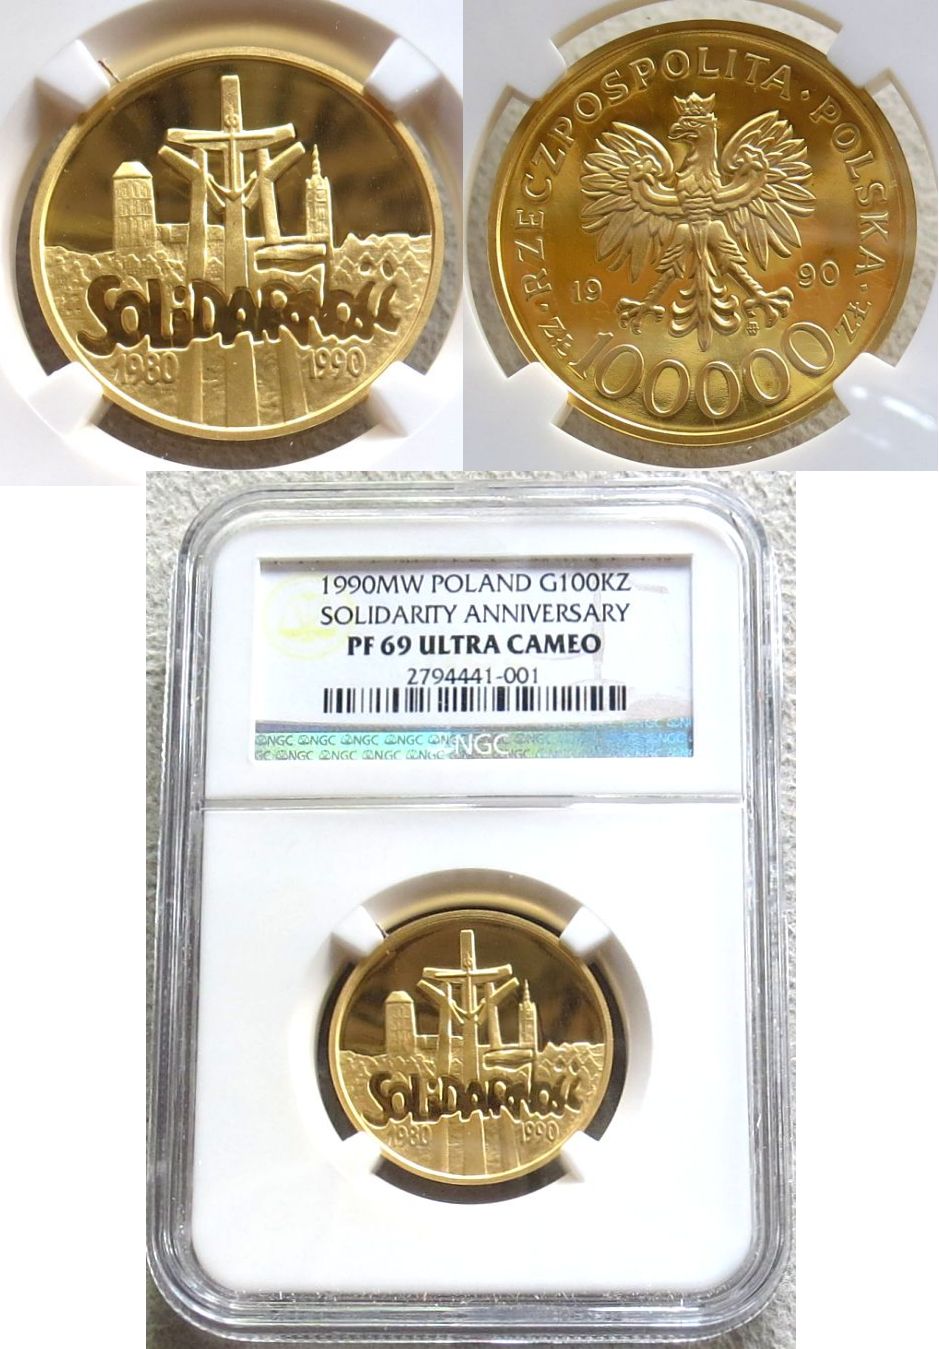 1990 GOLD POLAND 1,000 ZLOTYCH NGC PROOF 69 ULTRA CAMEO "SOLIDARITY